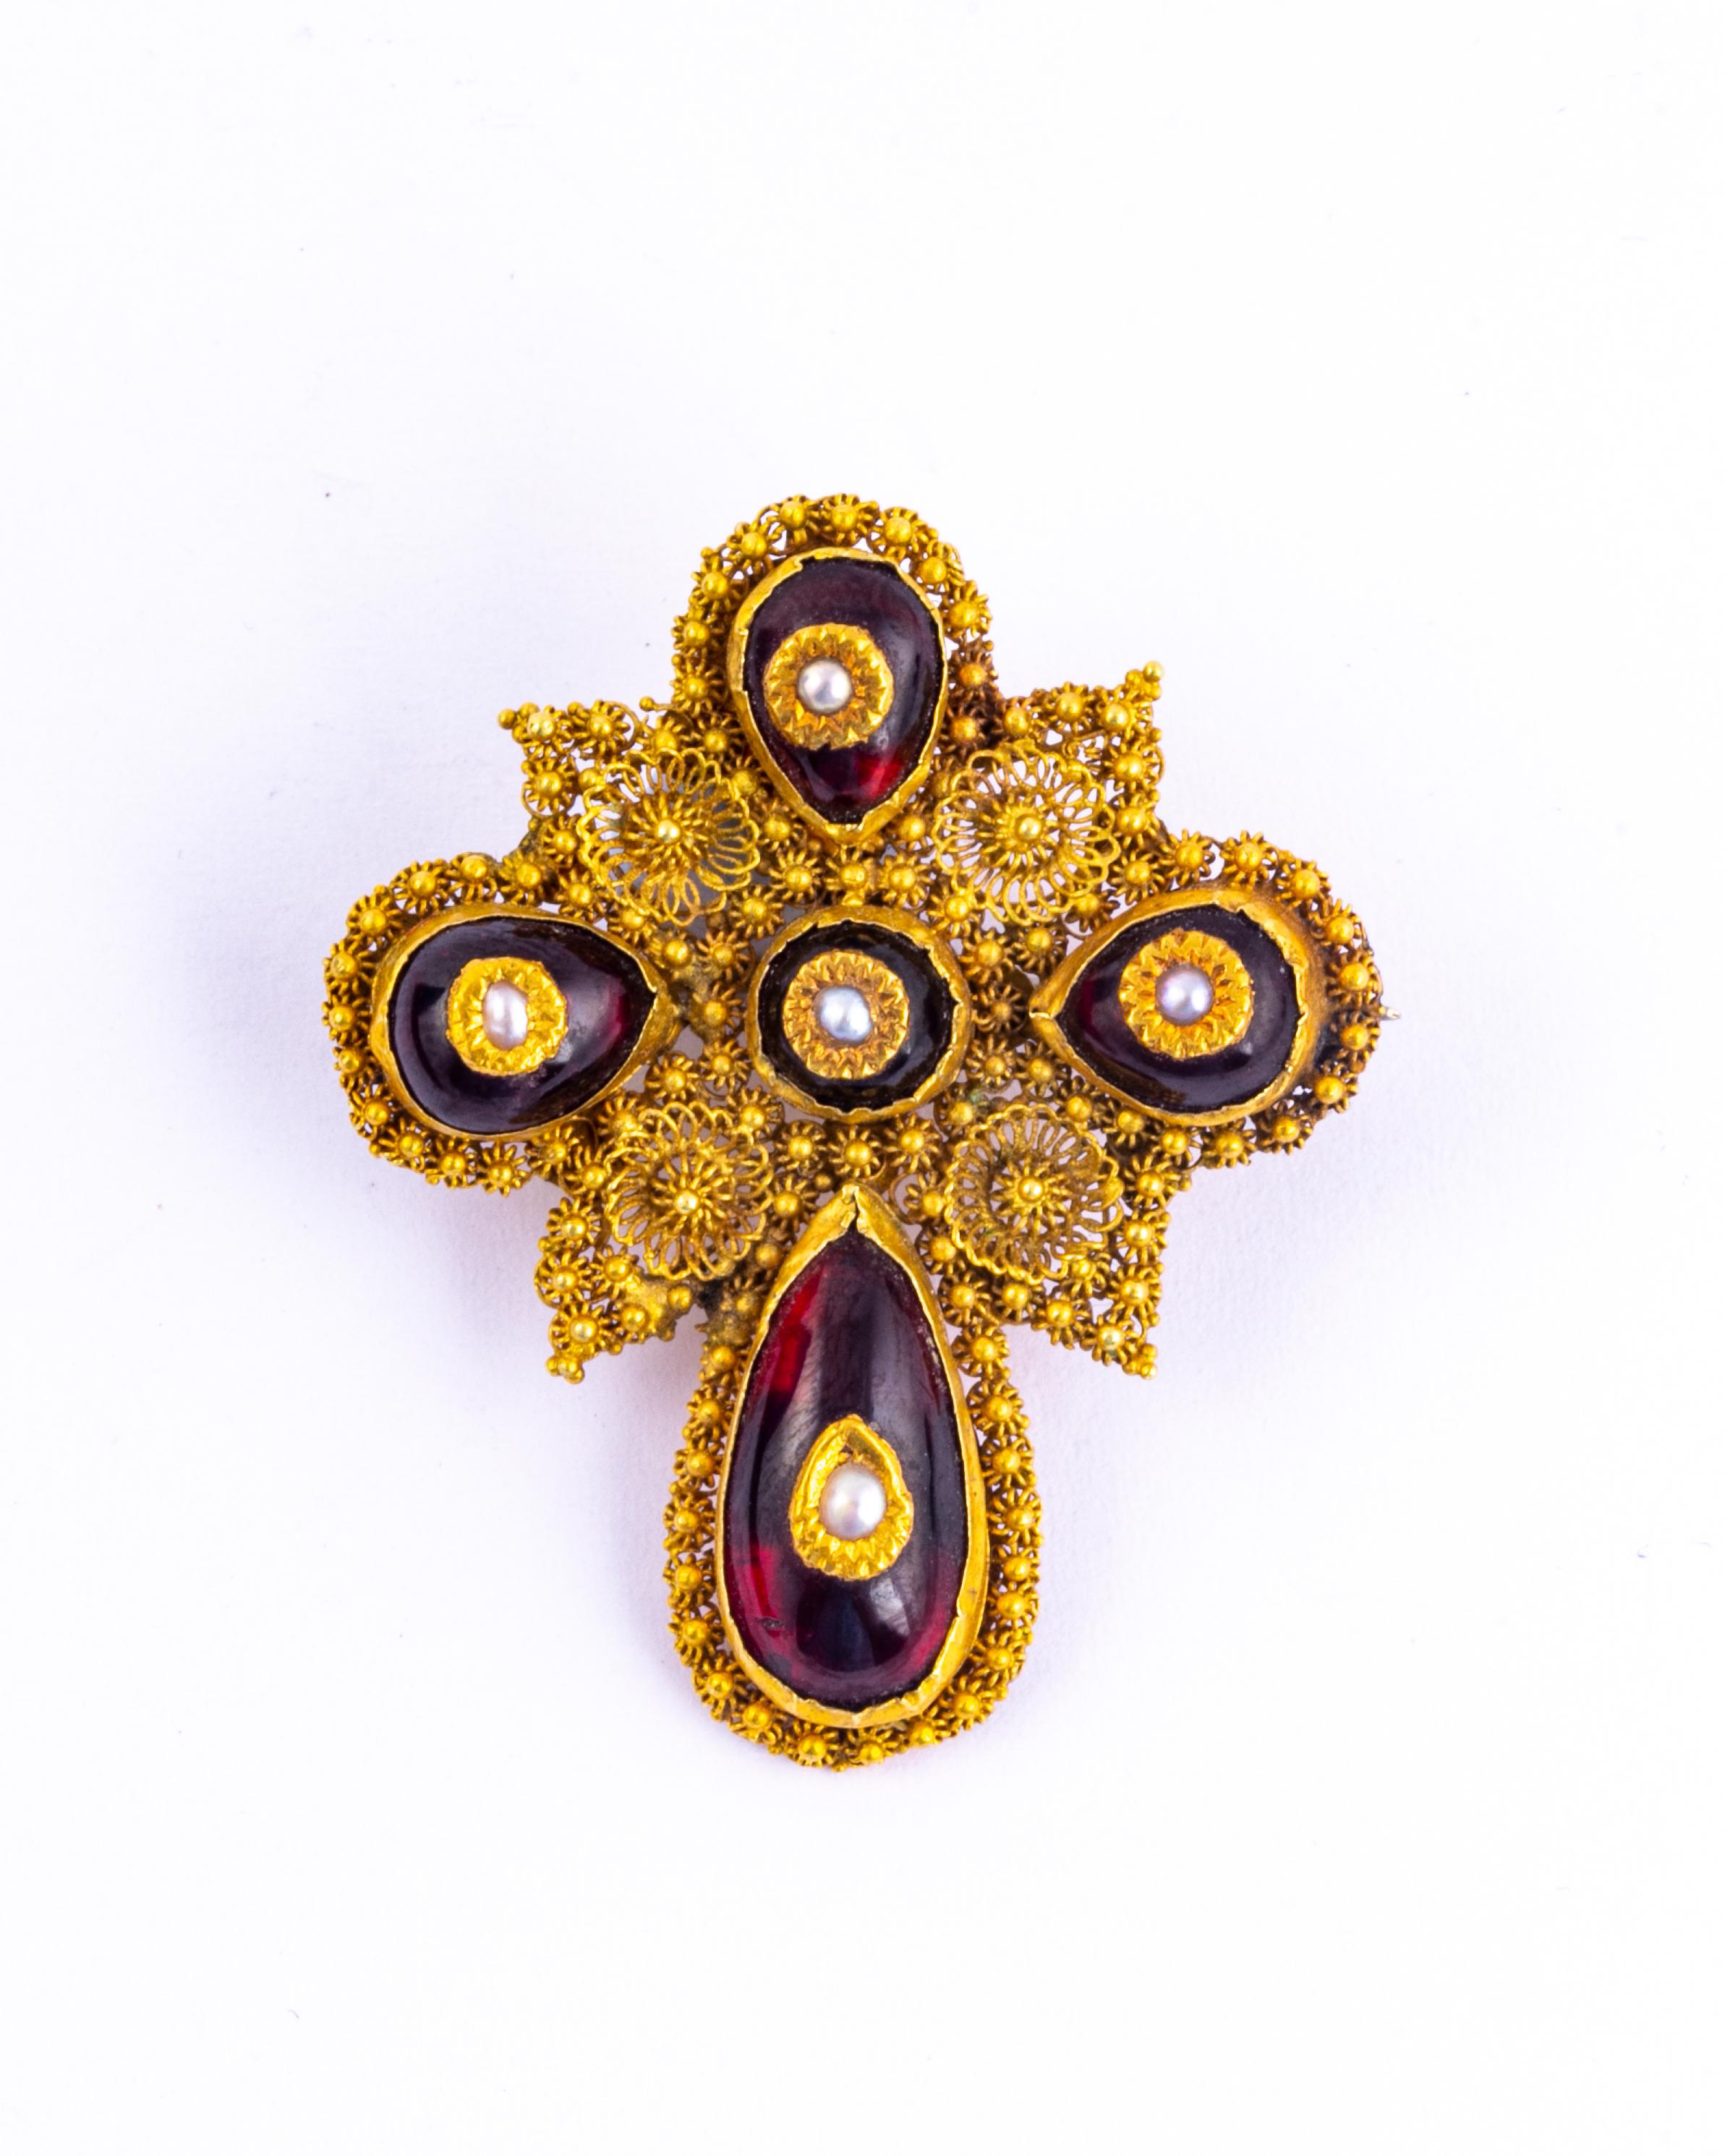 These stunning cabochon garnets are set in yellow gold with intricate cannetille work. Sat on top of these gorgeous red stones are seed pearls in gold petals. The earrings are worn using a shepherds hook and the brooch has a classic pin back. The